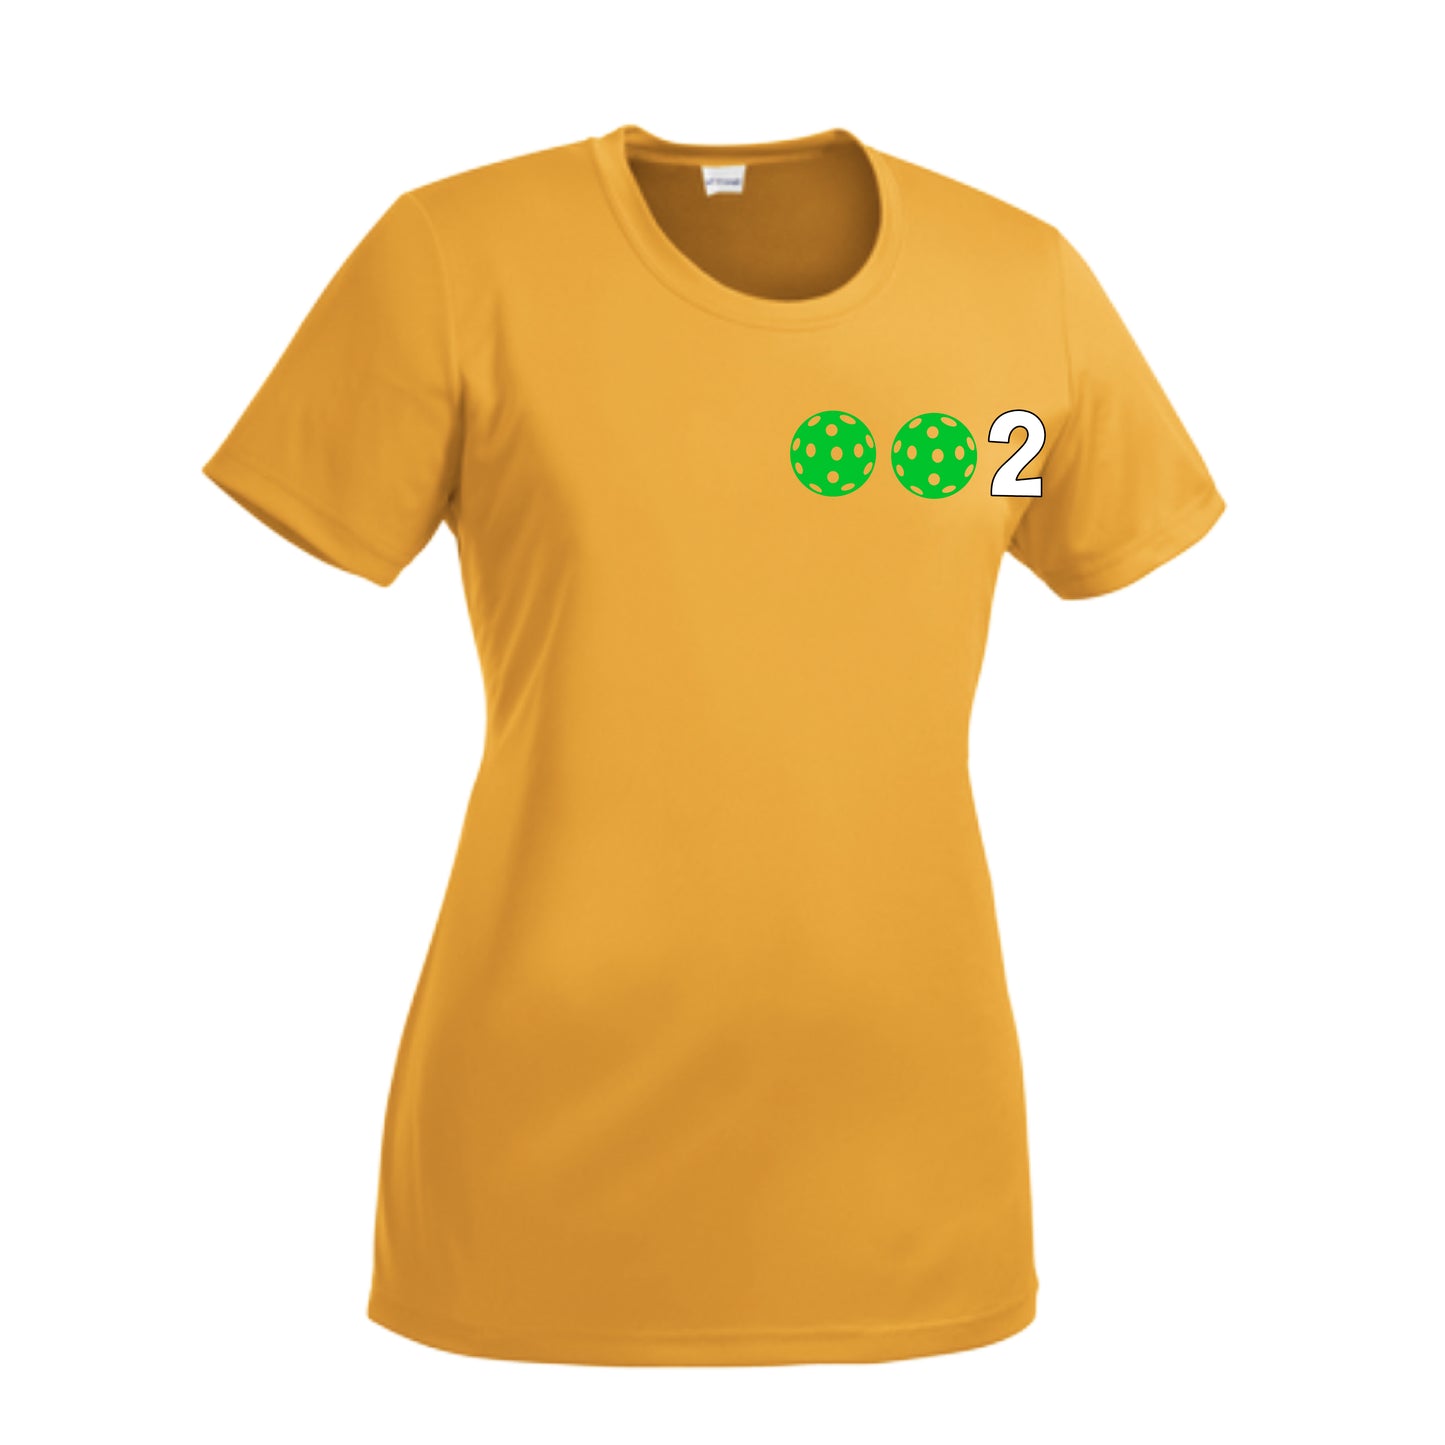 002 With Pickleballs (Green Orange Red) Customizable | Women’s Short Sleeve Crewneck Athletic Shirts | 100% Polyester